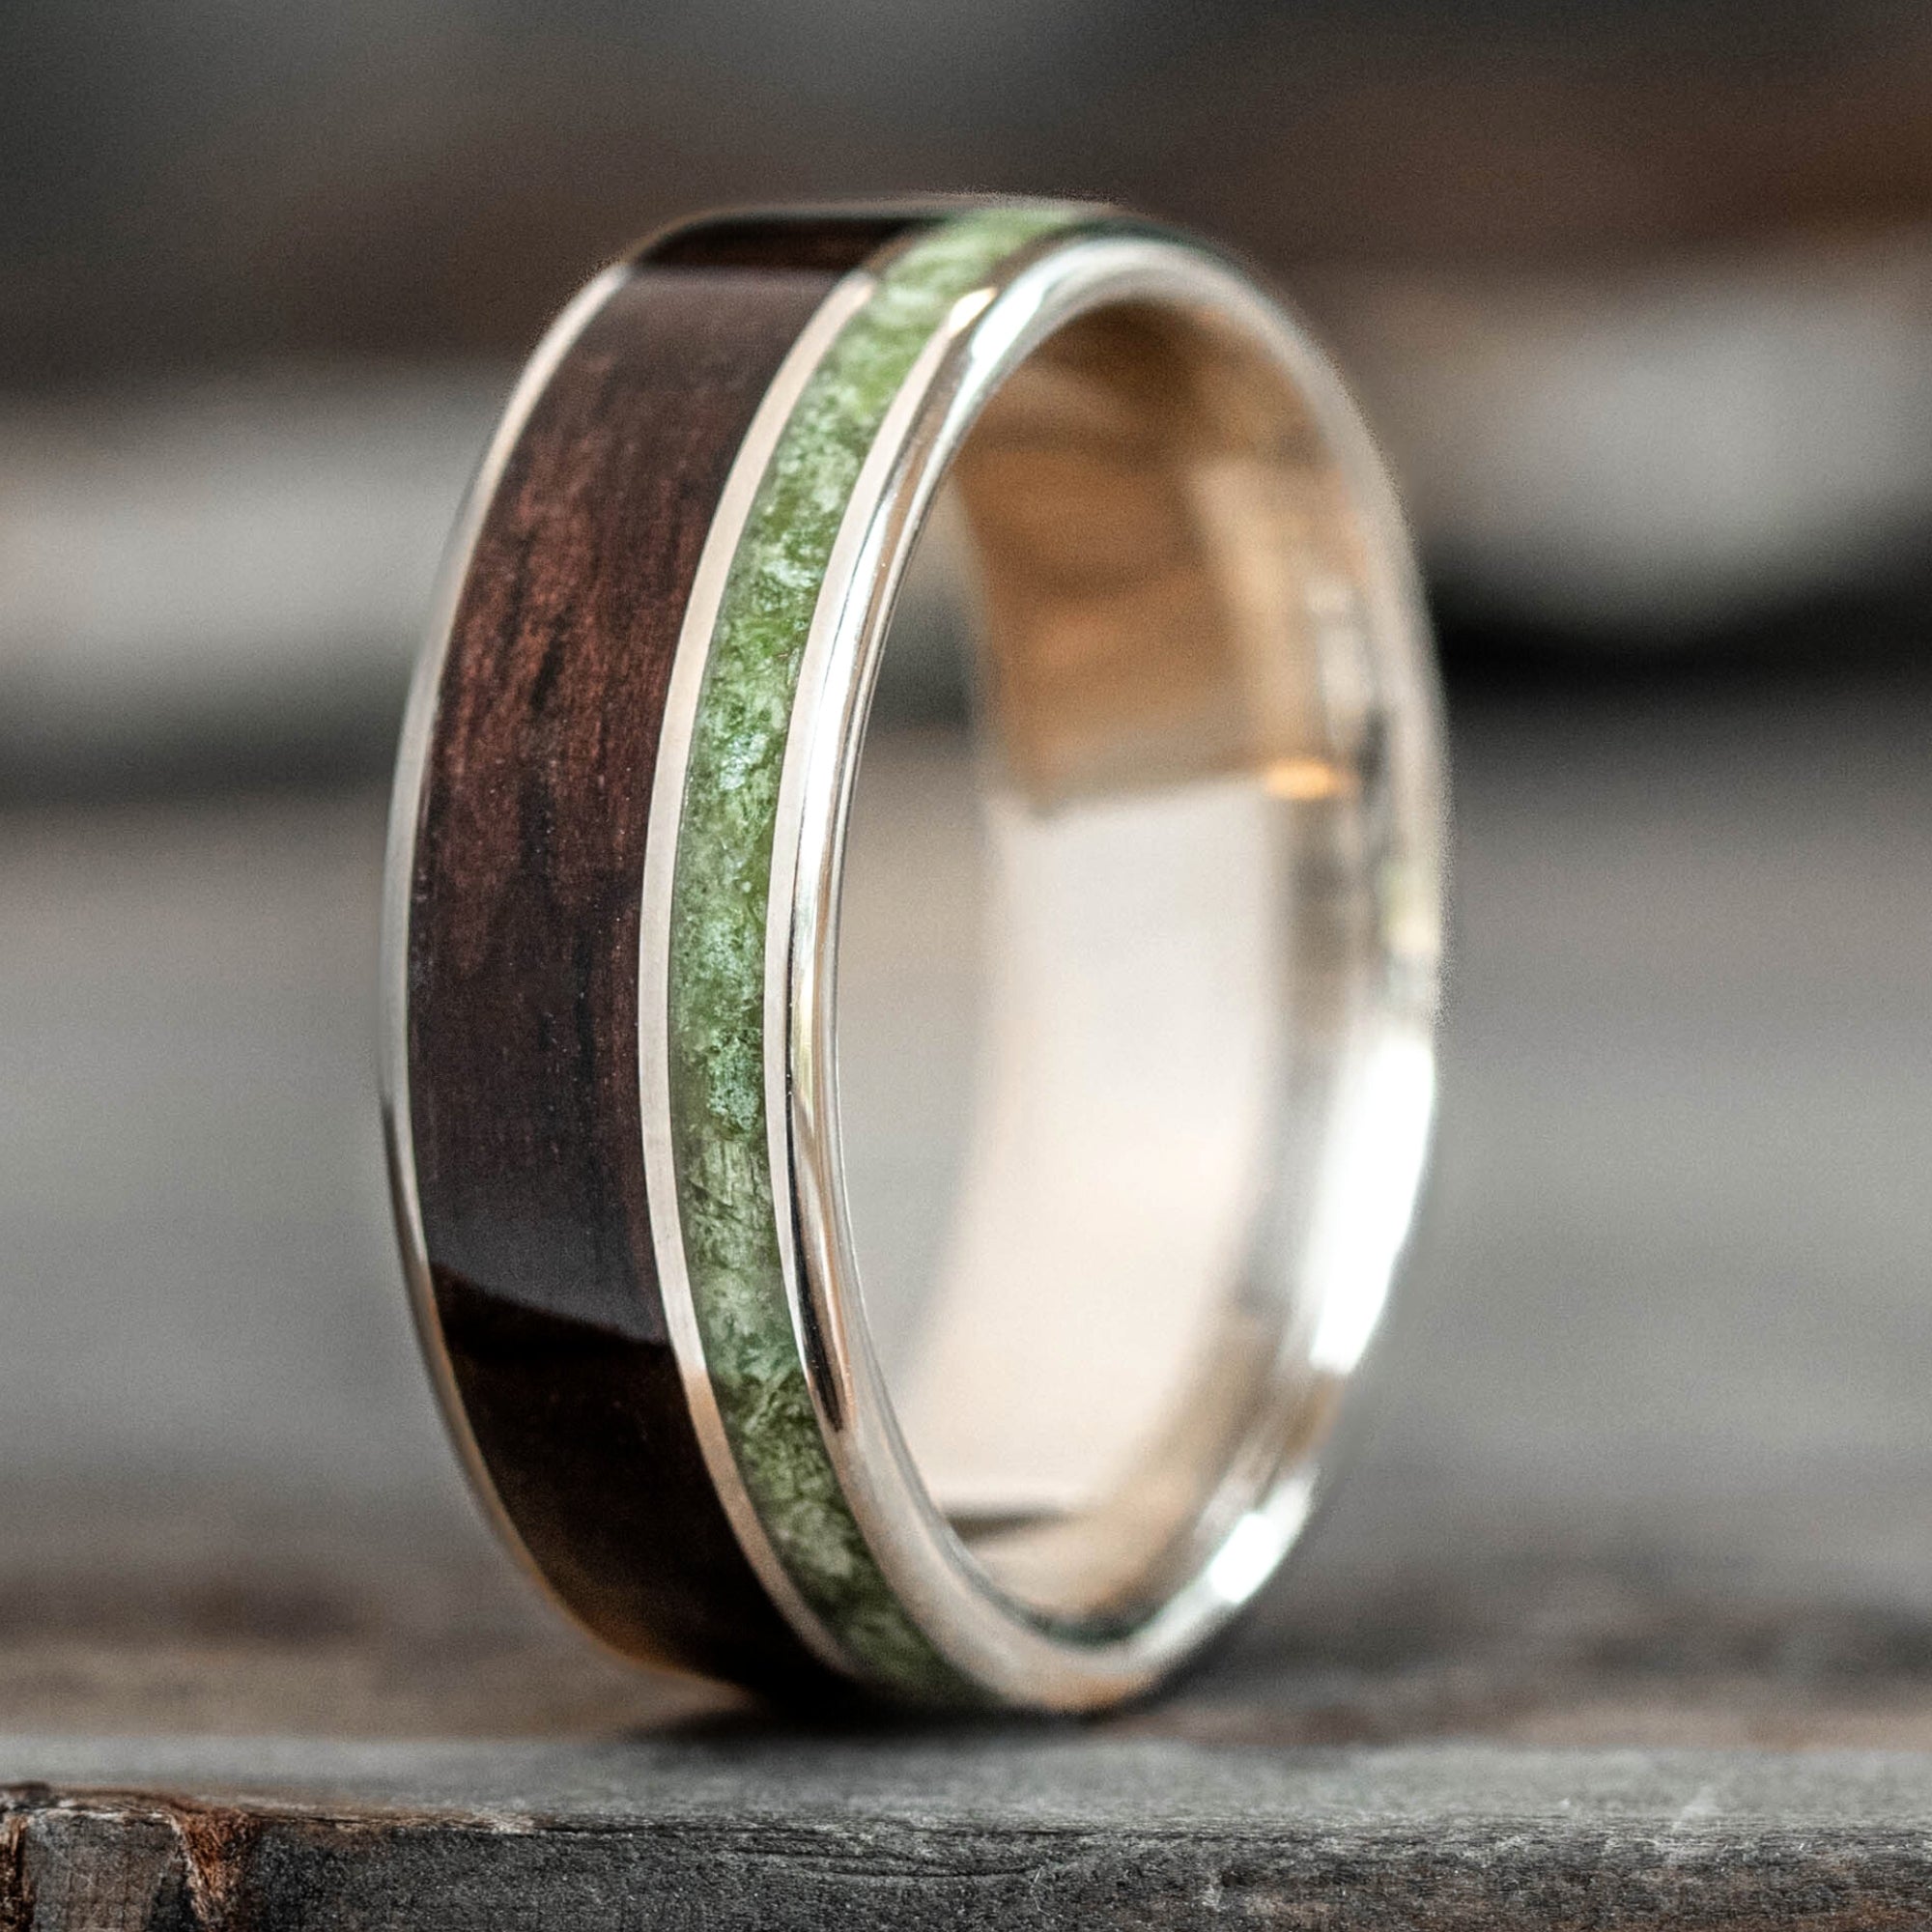 The Sage Ring - Titanium Men's Wedding Bands with Rosewood and Jade – Rustic  and Main